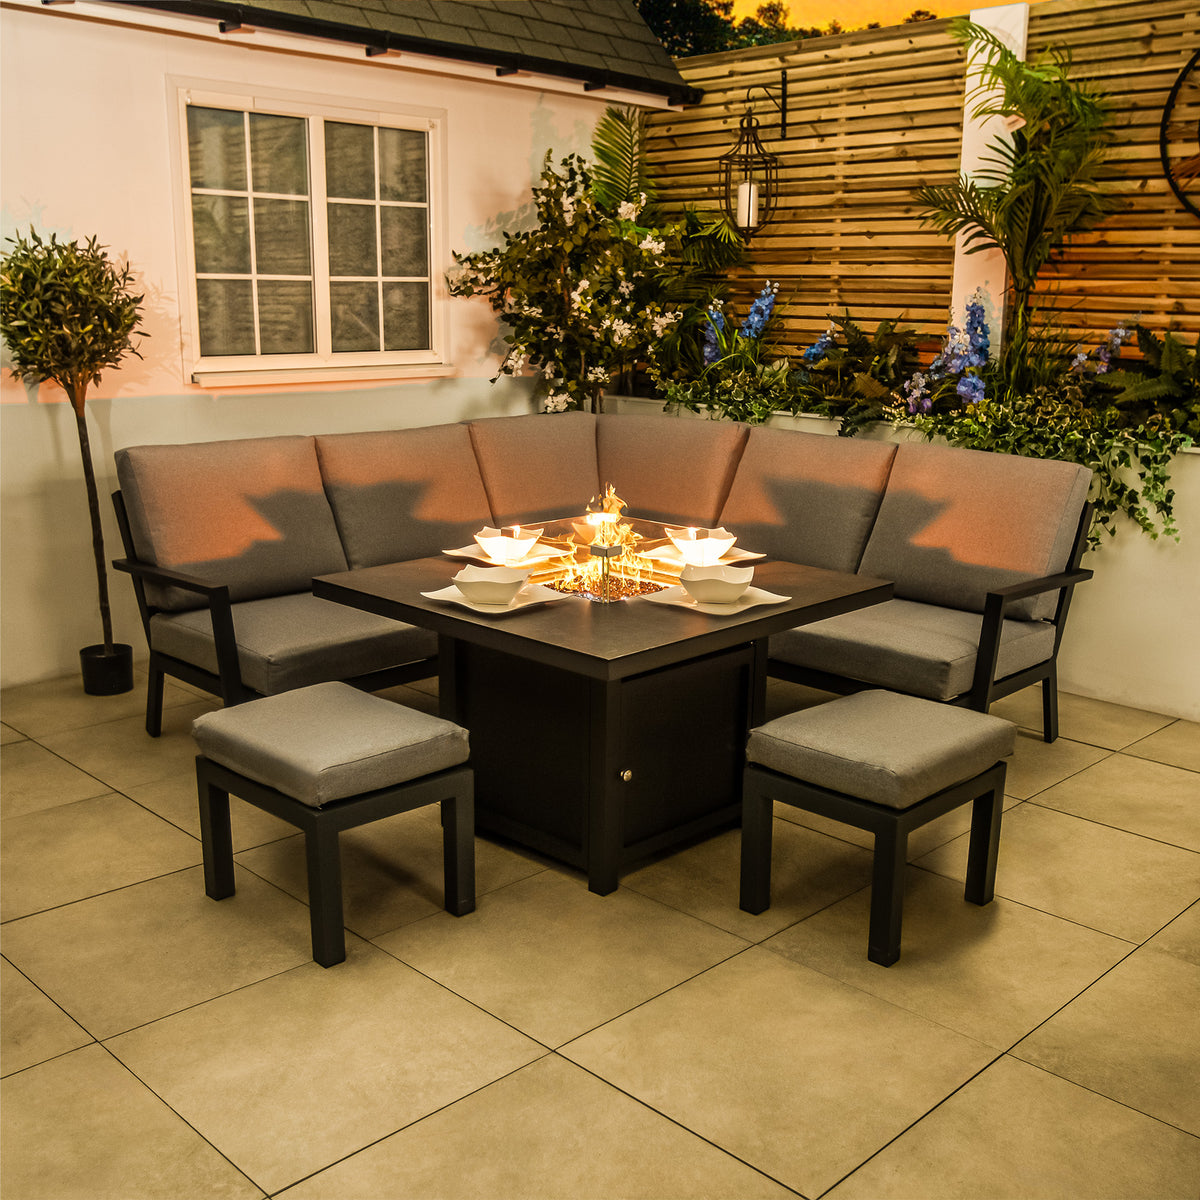 Bracken Outdoors Miami Dark Aluminium Compact Corner Set with Gas Fire Pit Table and Stools